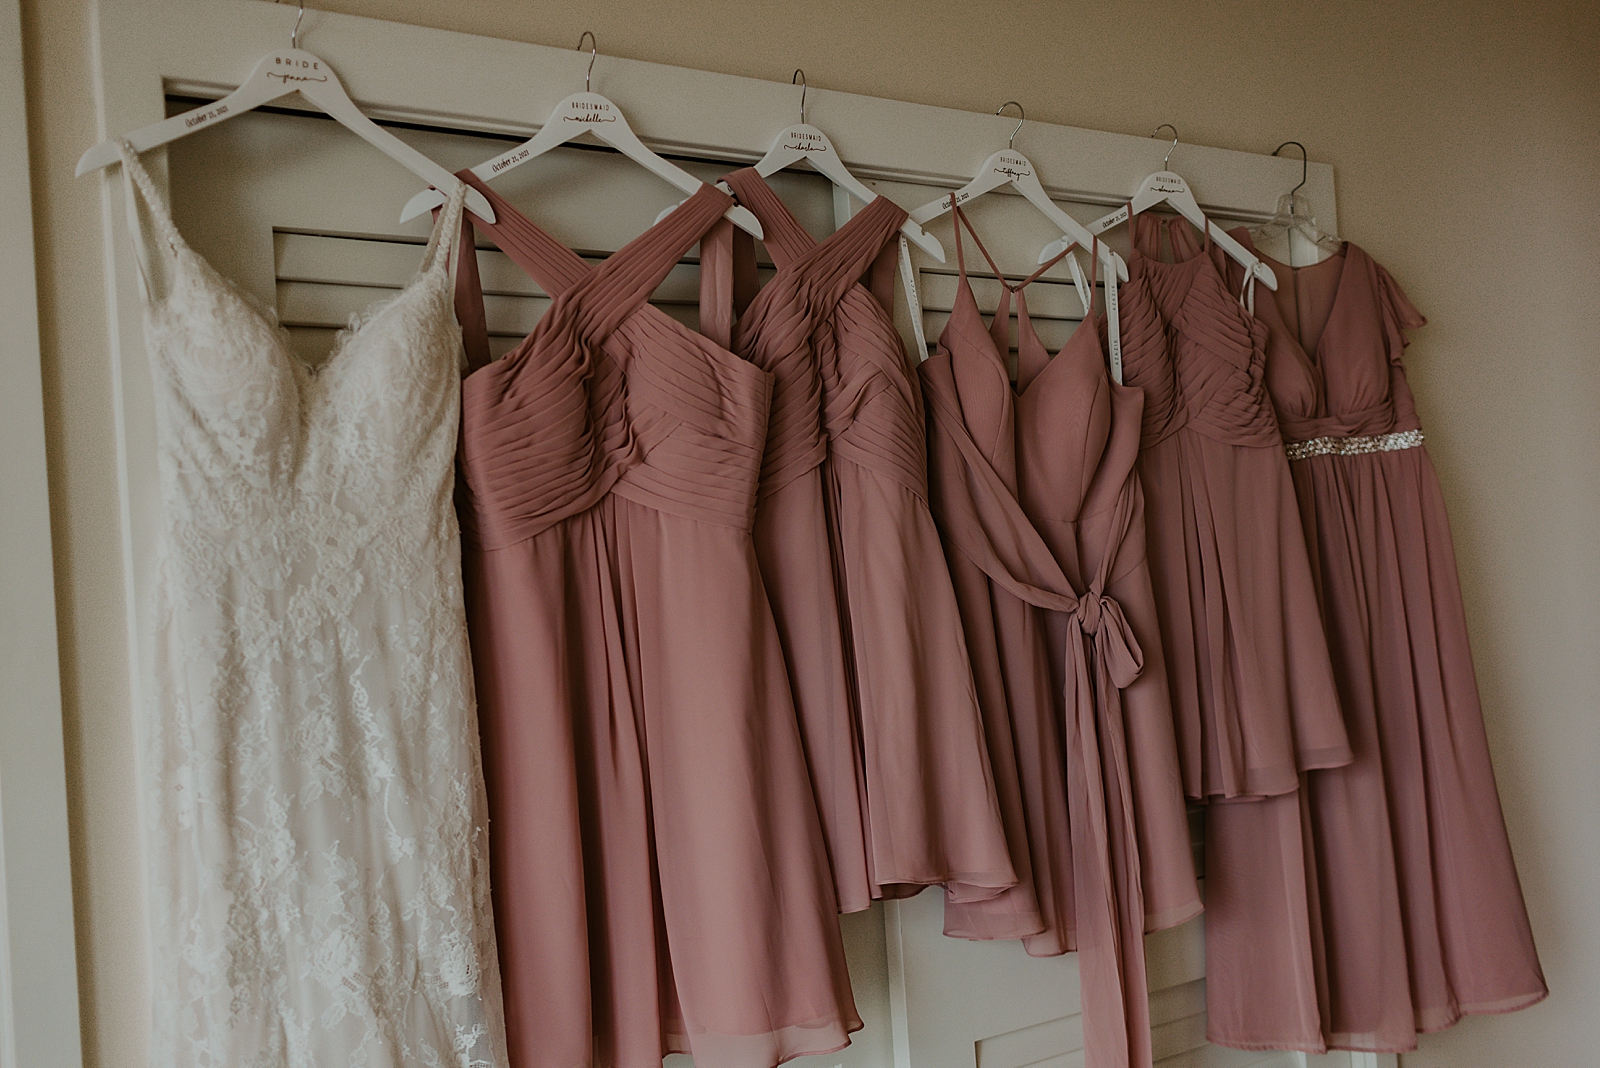 Wedding dress and Bridesmaid dresses hanging together in a row